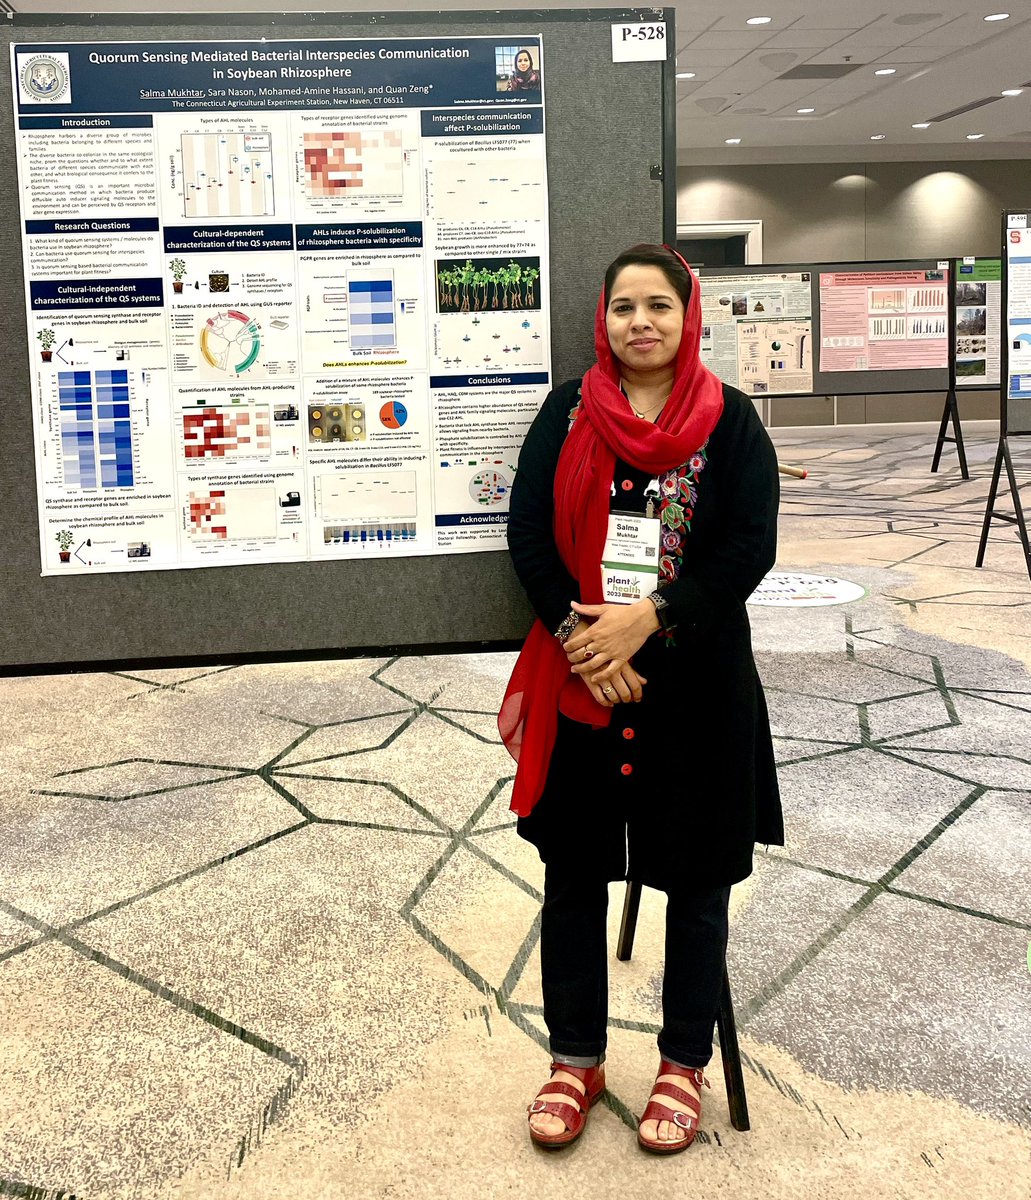 Feeling happy to have attended #PlantHealth2023 and presented my work about Quorum Sensing Mediated Bacterial Interspecies Communication in Soybean Rhizosphere. Thanks everyone, who visited my poster and gave feedback. I am also thankful to Quan Zeng @oldkayak and Sara Nason!